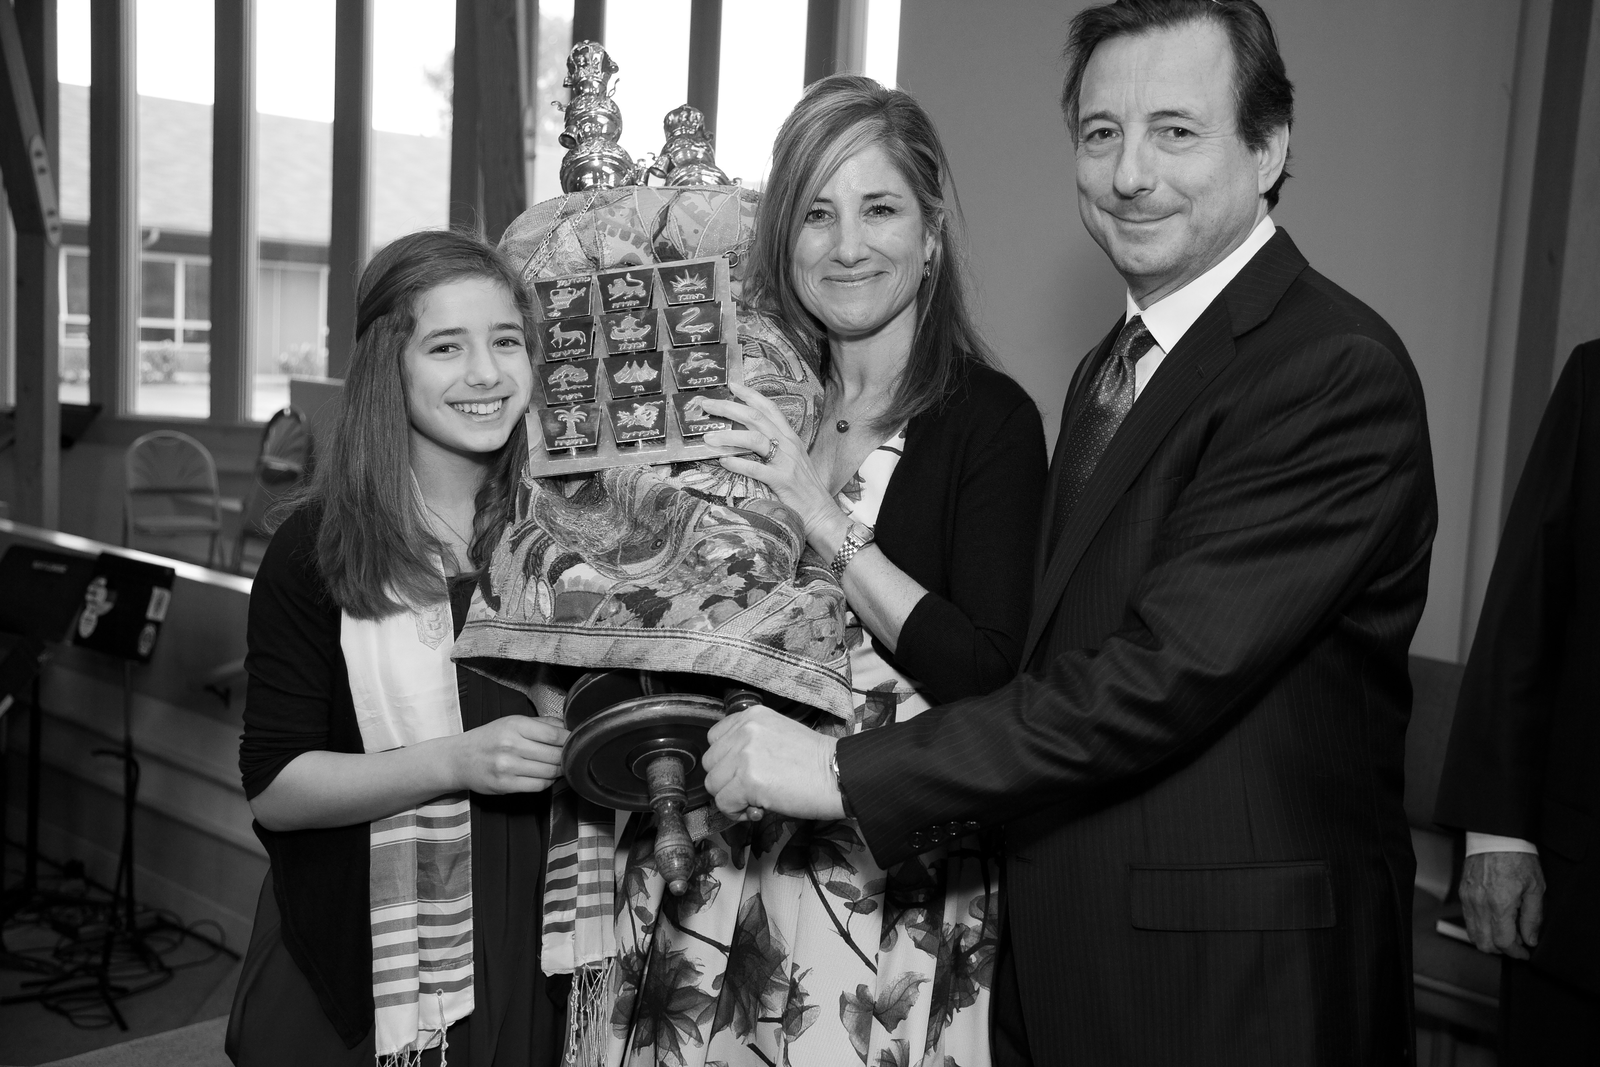 Patty and family at her daughter's bat mitzvah.